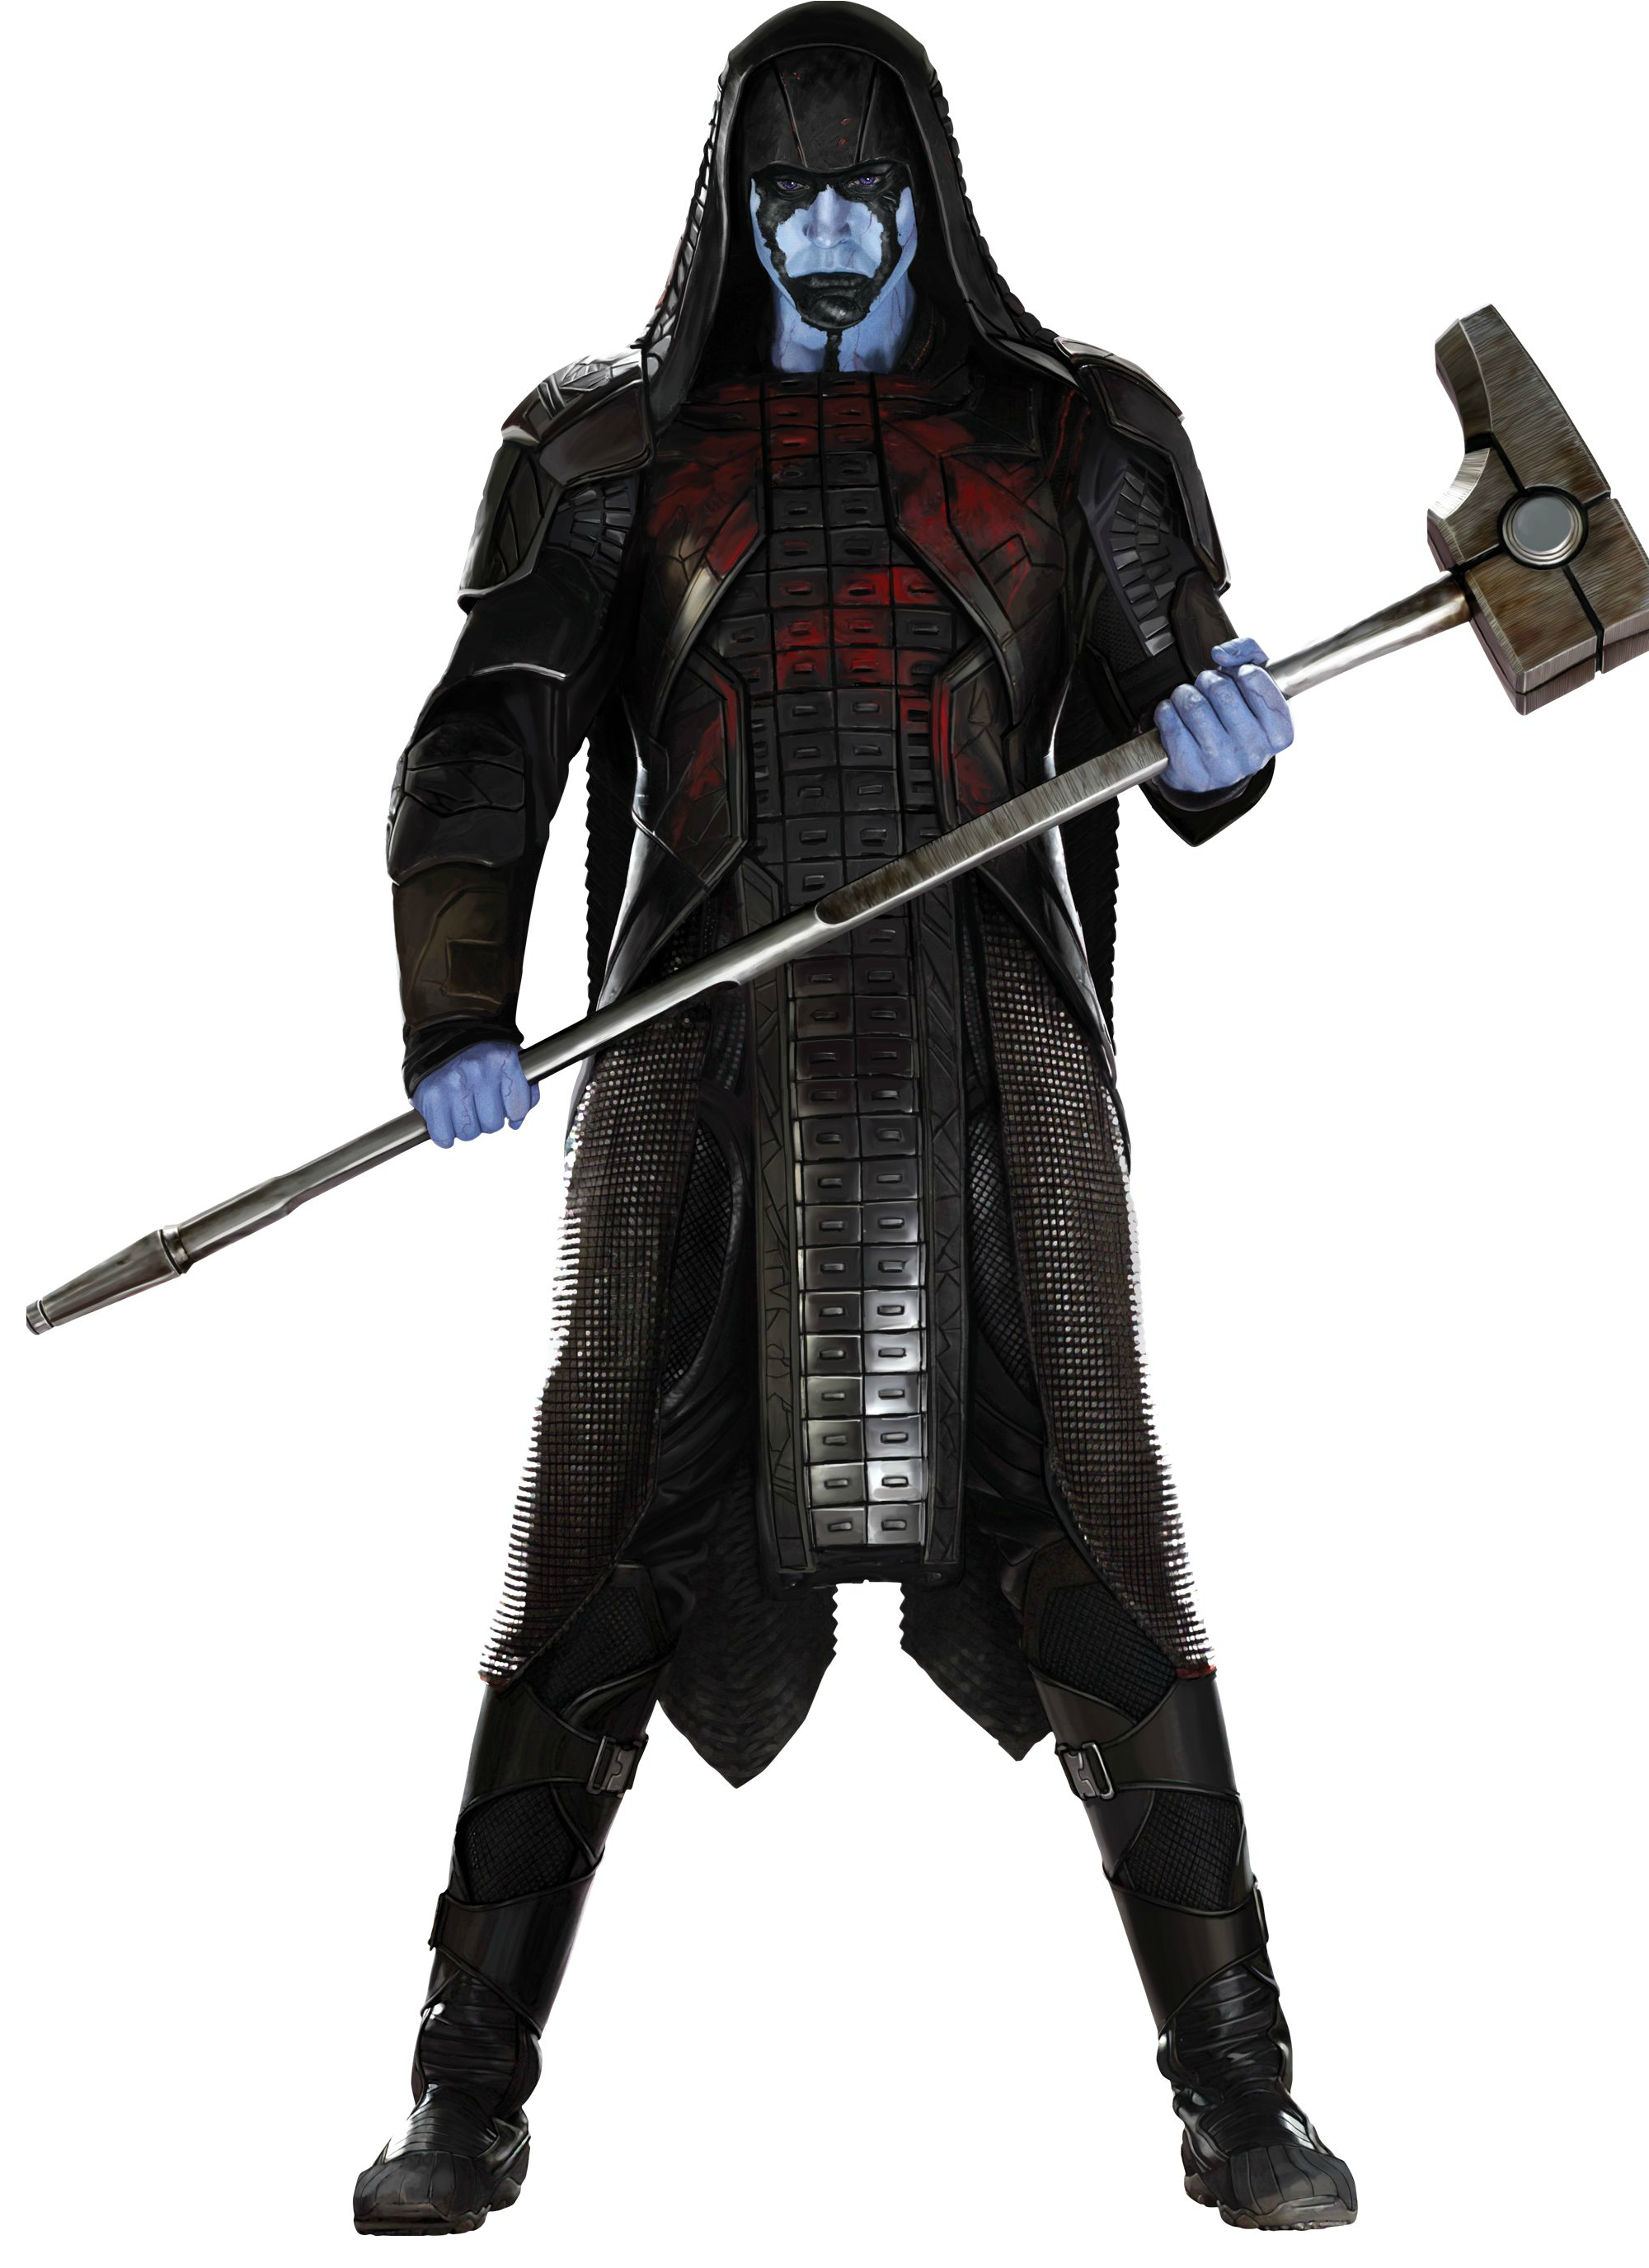 GUARDIANS OF THE GALAXY - Ronan the accuser, Gardians of the galaxy, Guardians of the galaxy